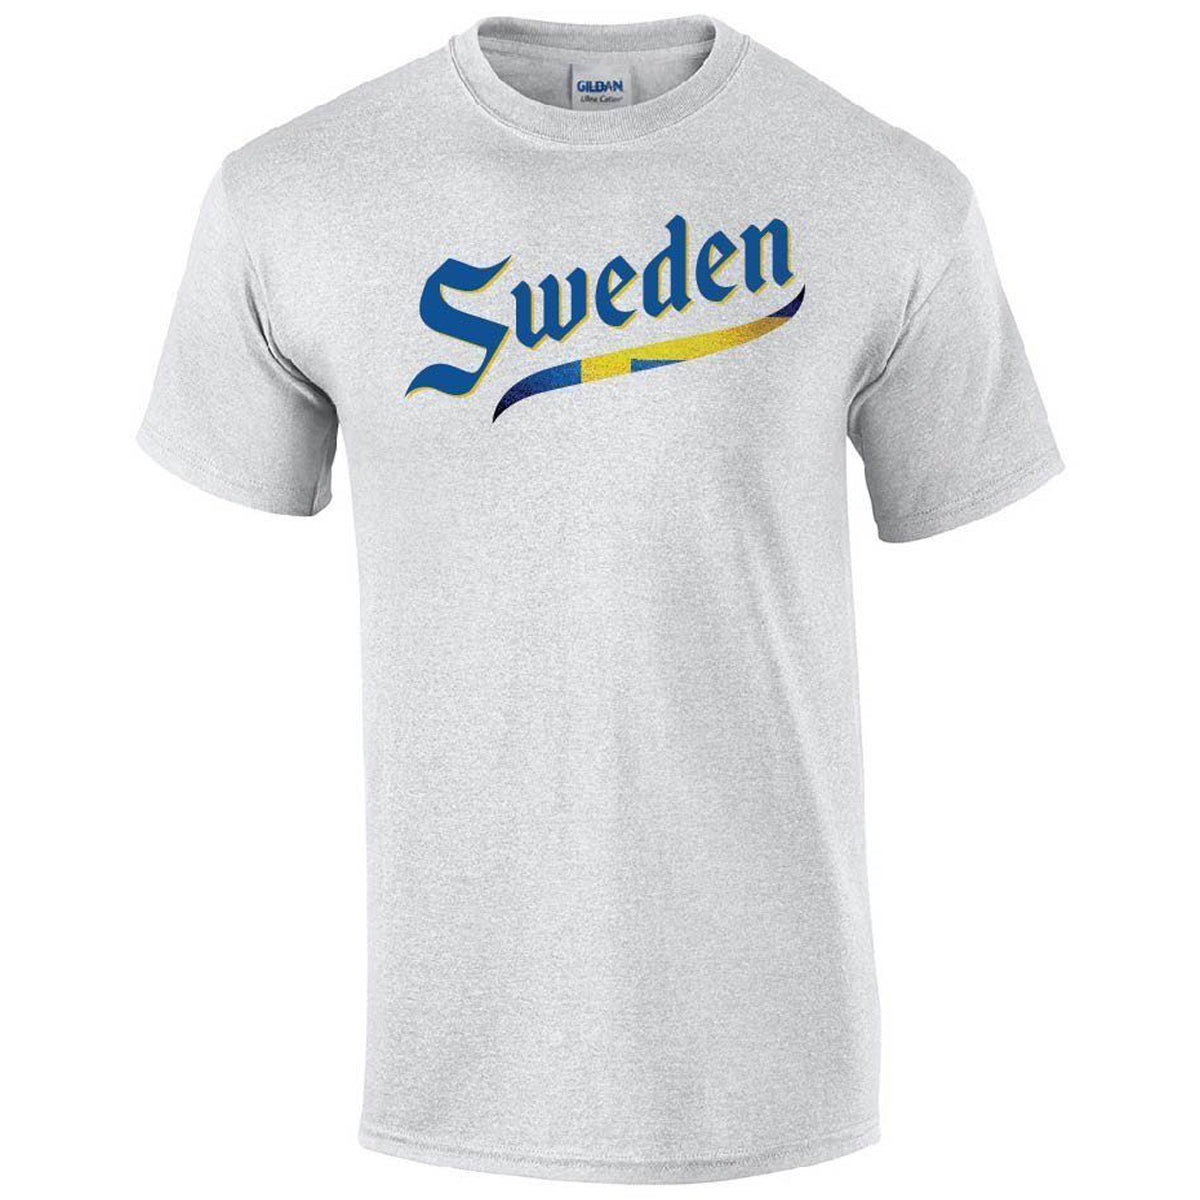 Sweden Script World Cup 2022 Printed Tee T-shirts 411 Youth Medium Ash Youth